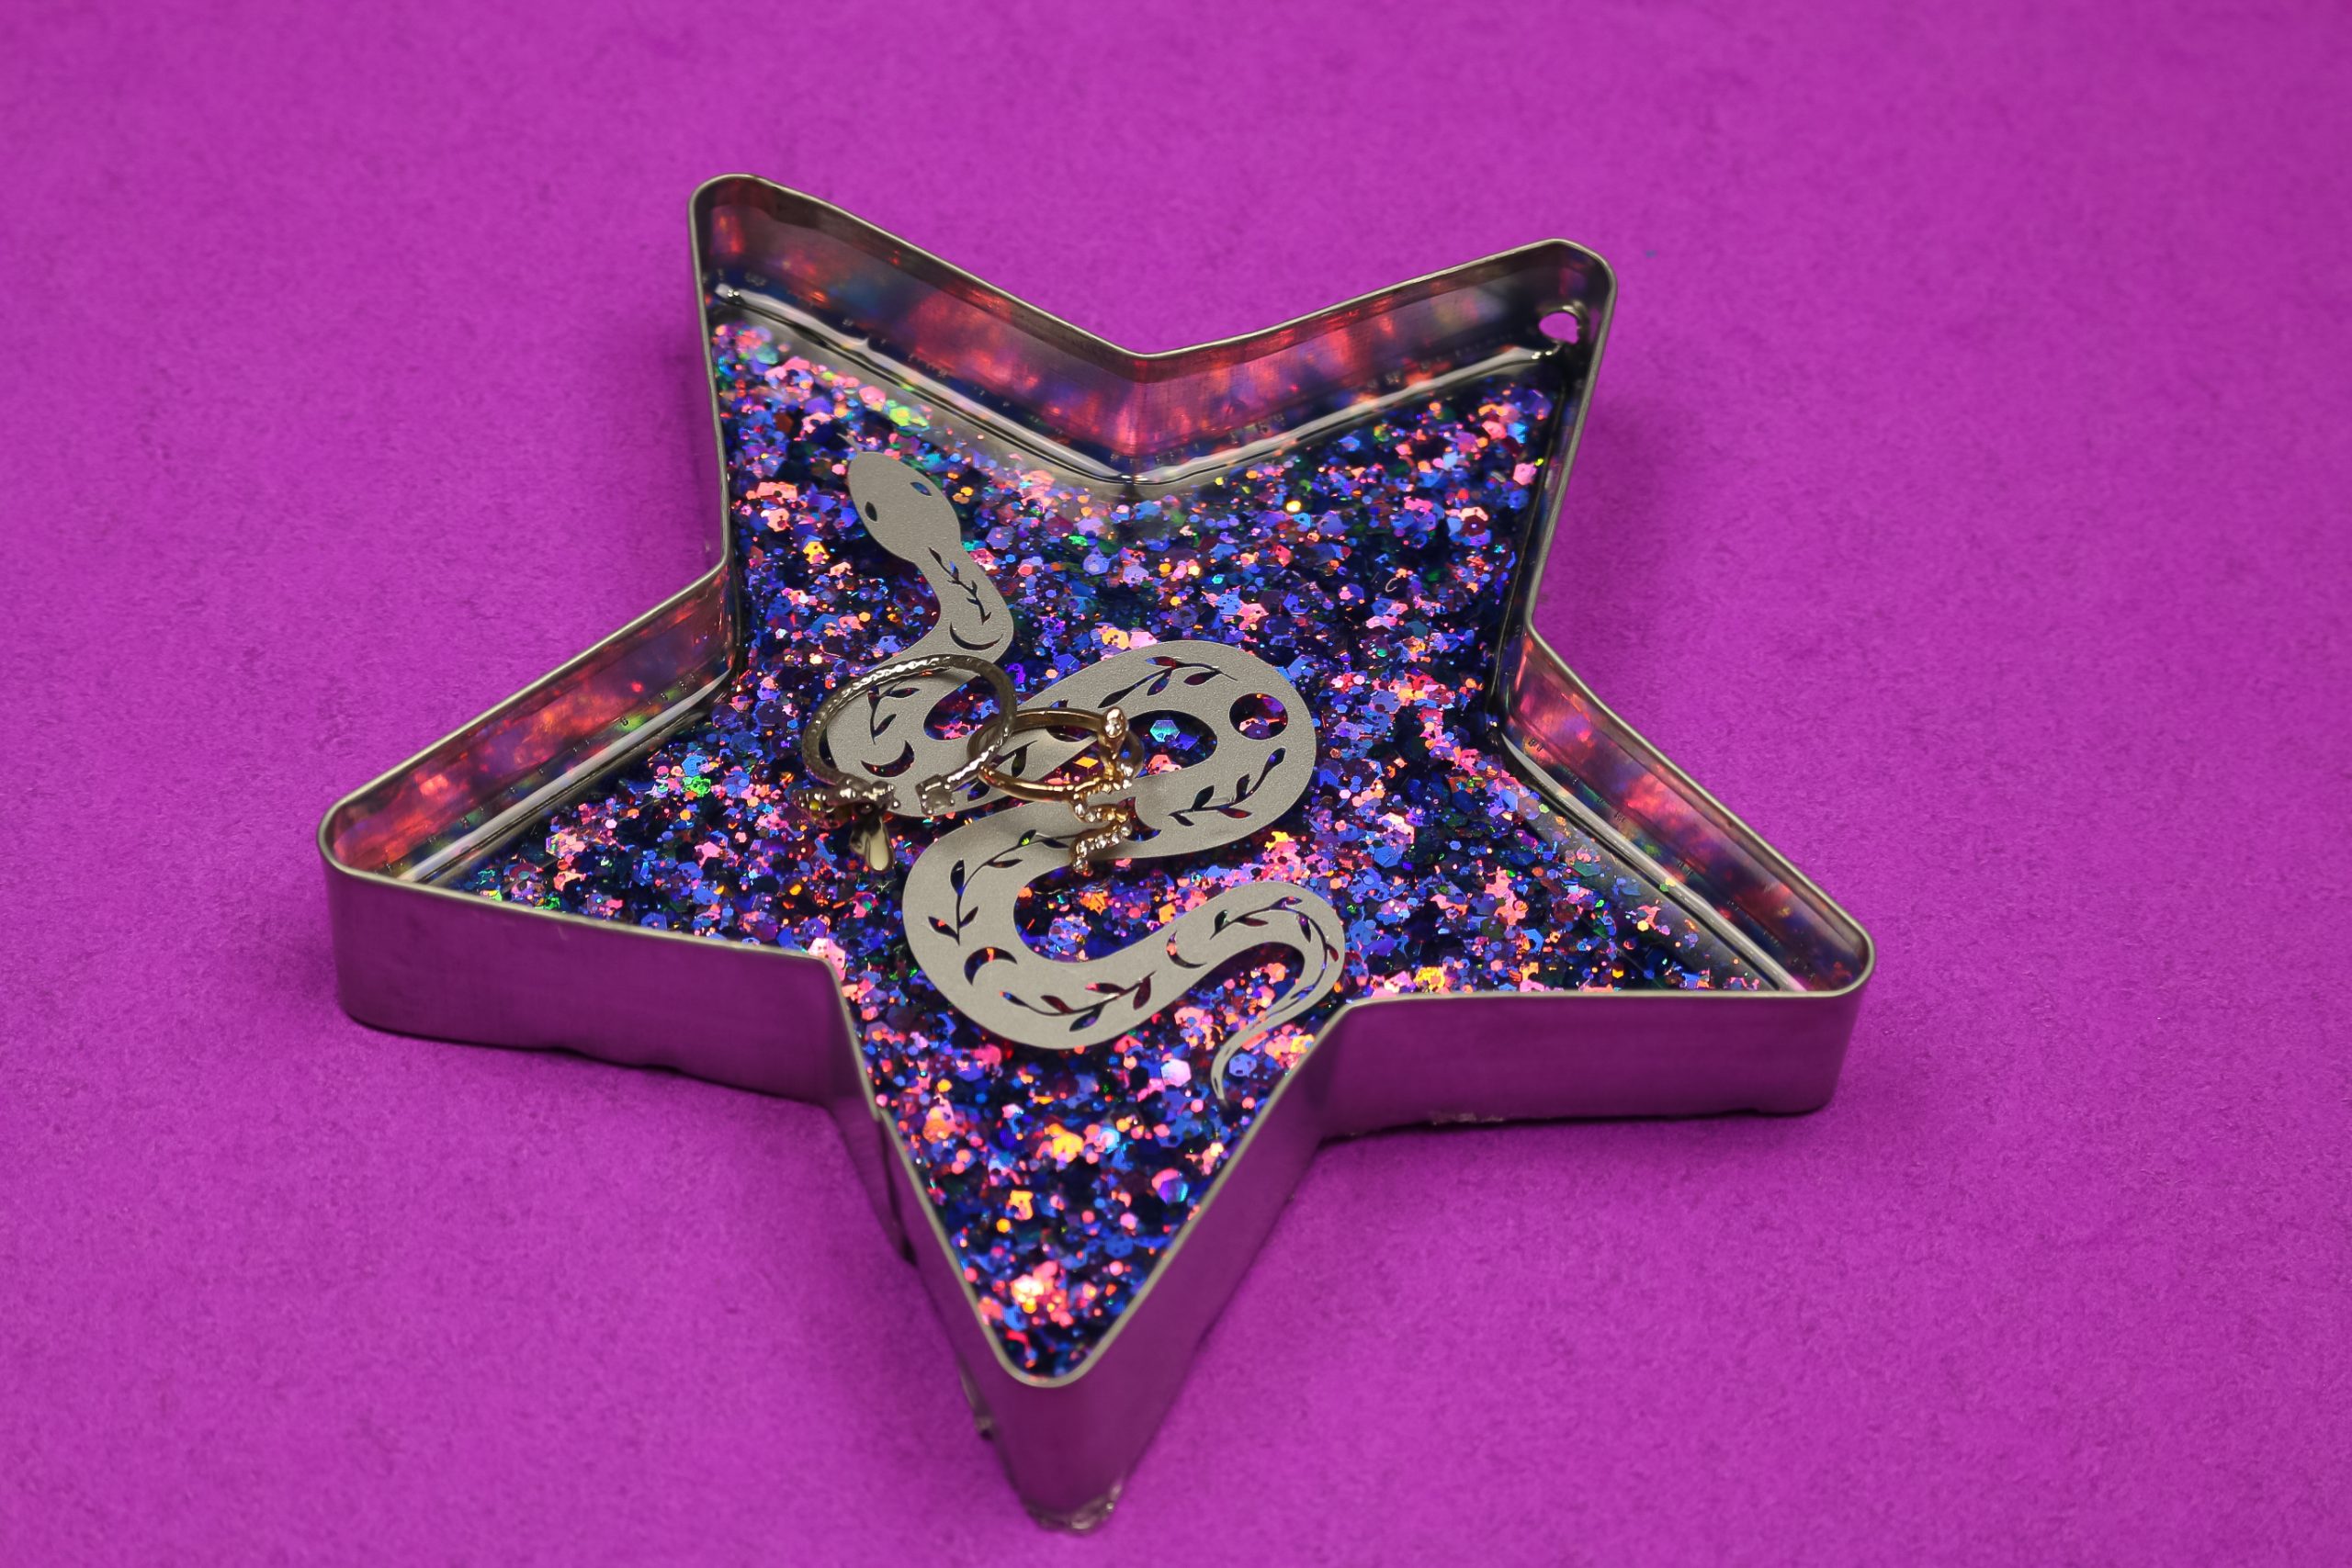 side view of star shaped ring dish made with glittery resin and decorated with a vinyl snake